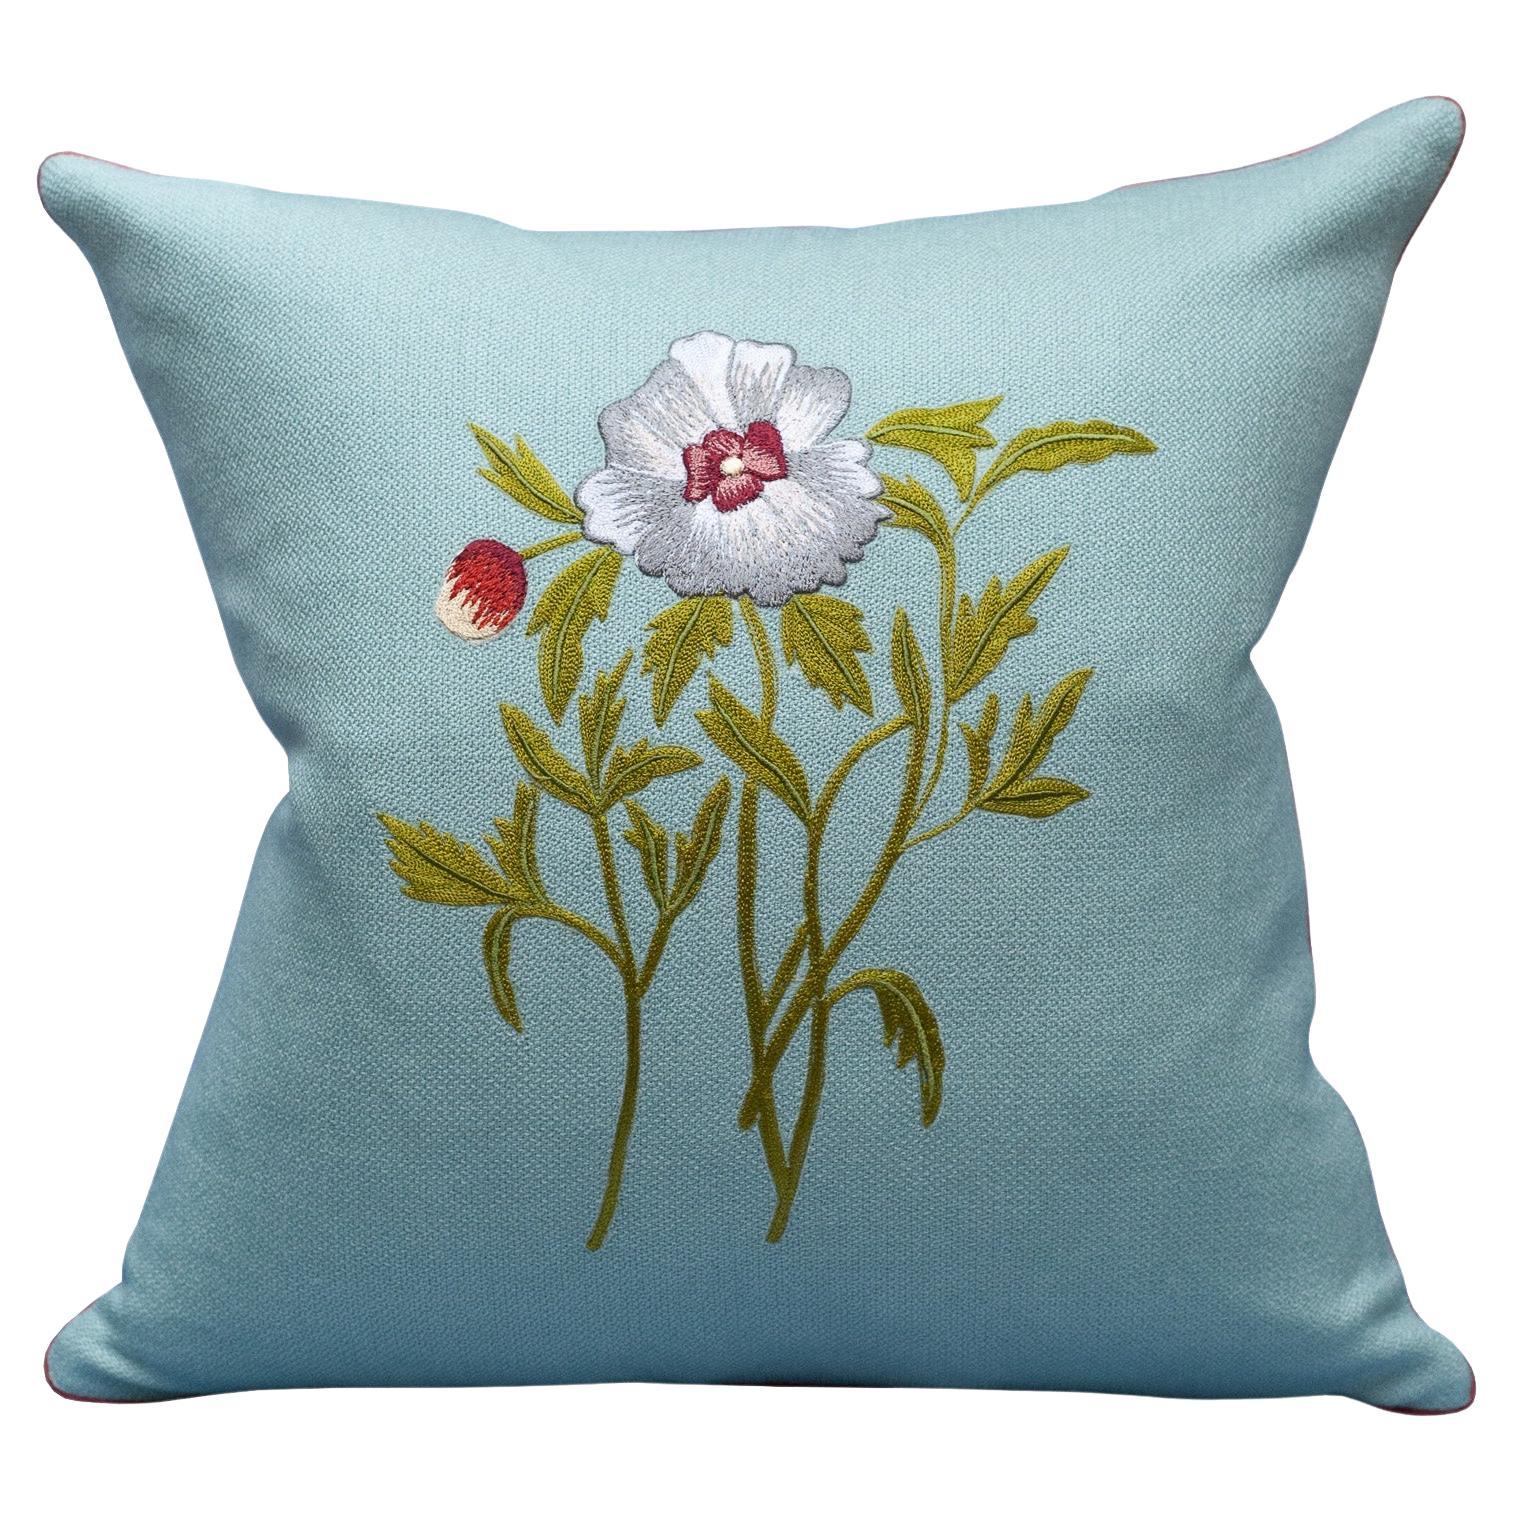 Contemporary Soft Blue Merino Wool and Linen Pillow with Embroidered Flower